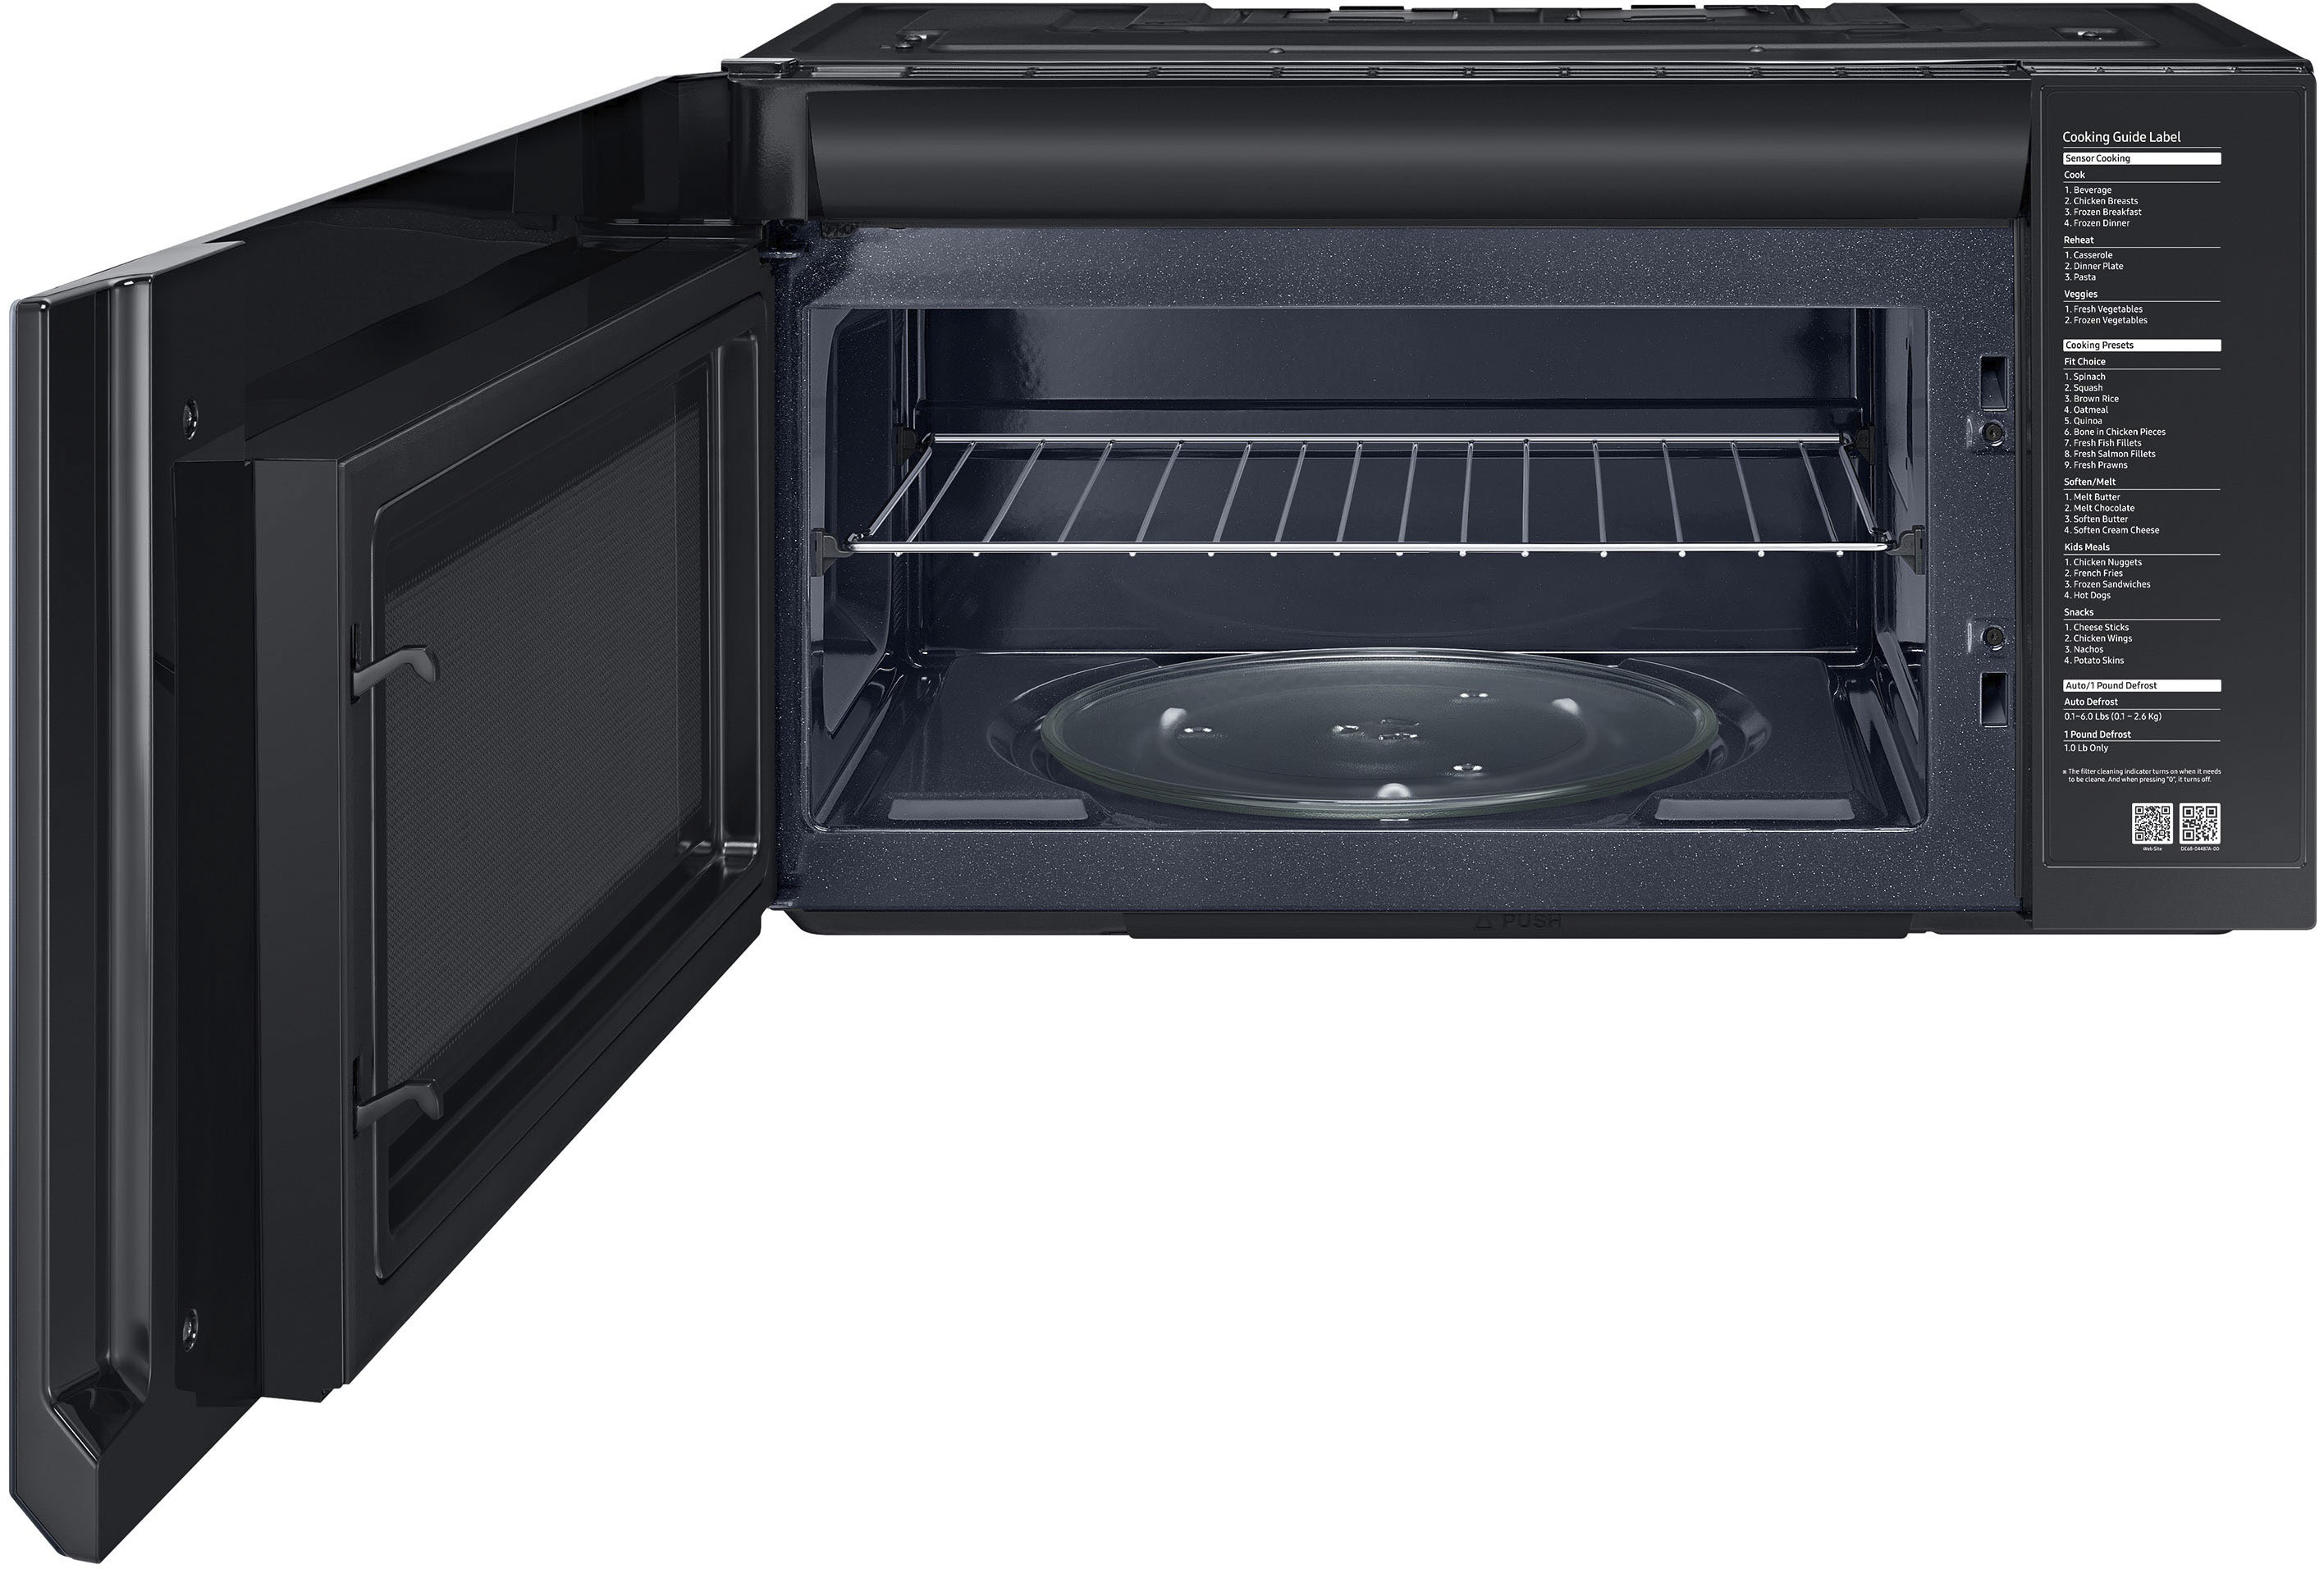 Early Order for The Samsung BESPOKE Top Mount Freezer Starts Today –  Receive Free BESPOKE Microwave Oven Worth RM799! – Samsung Newsroom Malaysia